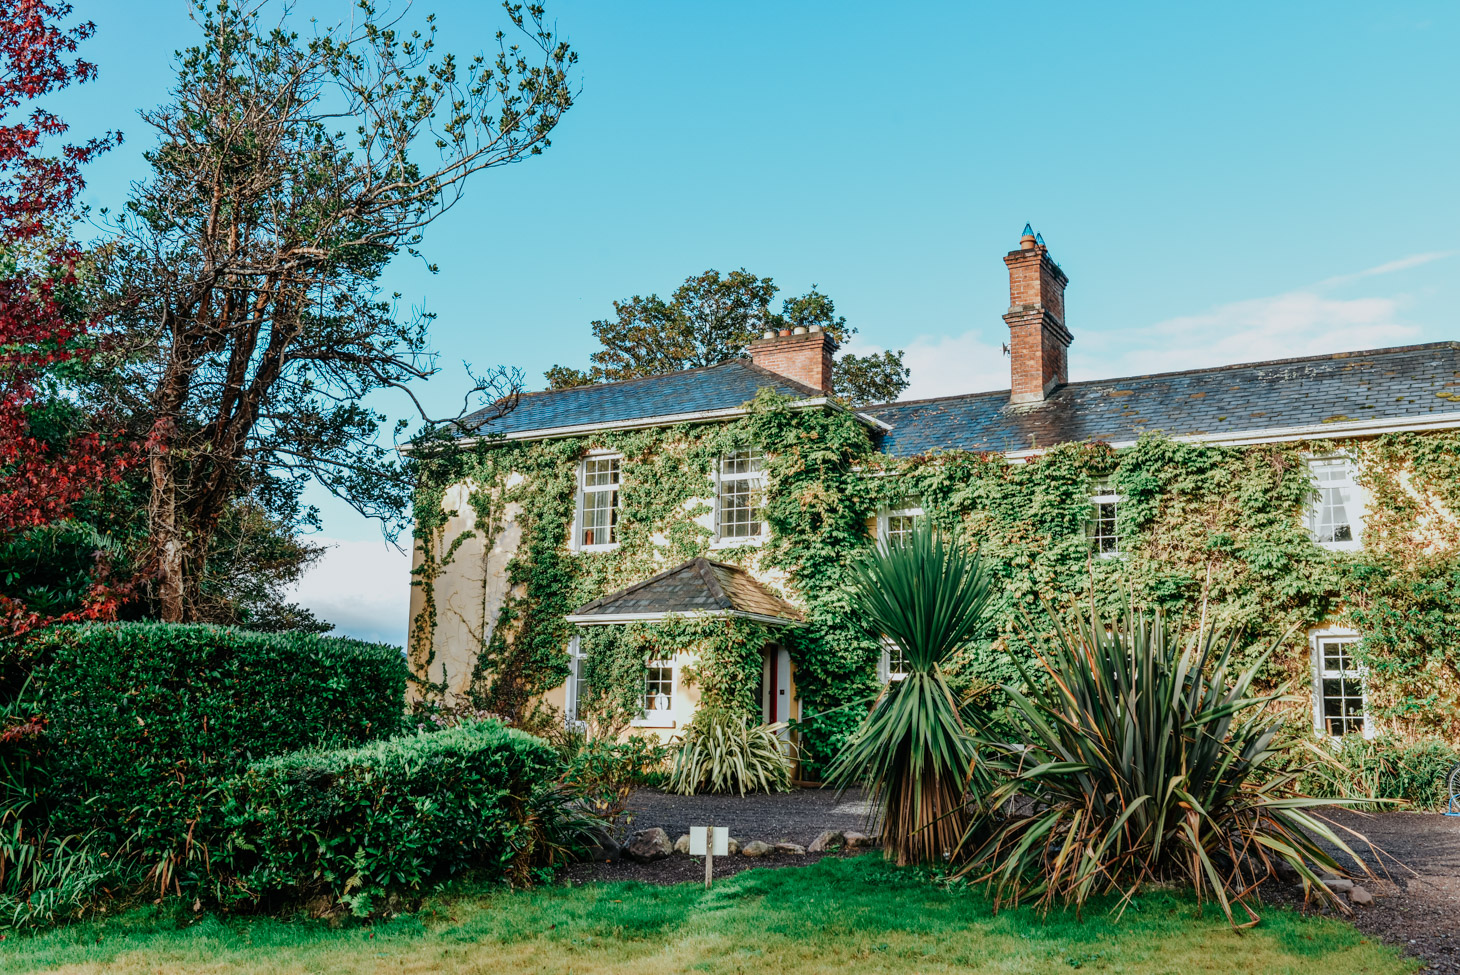 Carrig Country House review featured by top US travel blog, Lone Star Looking Glass.